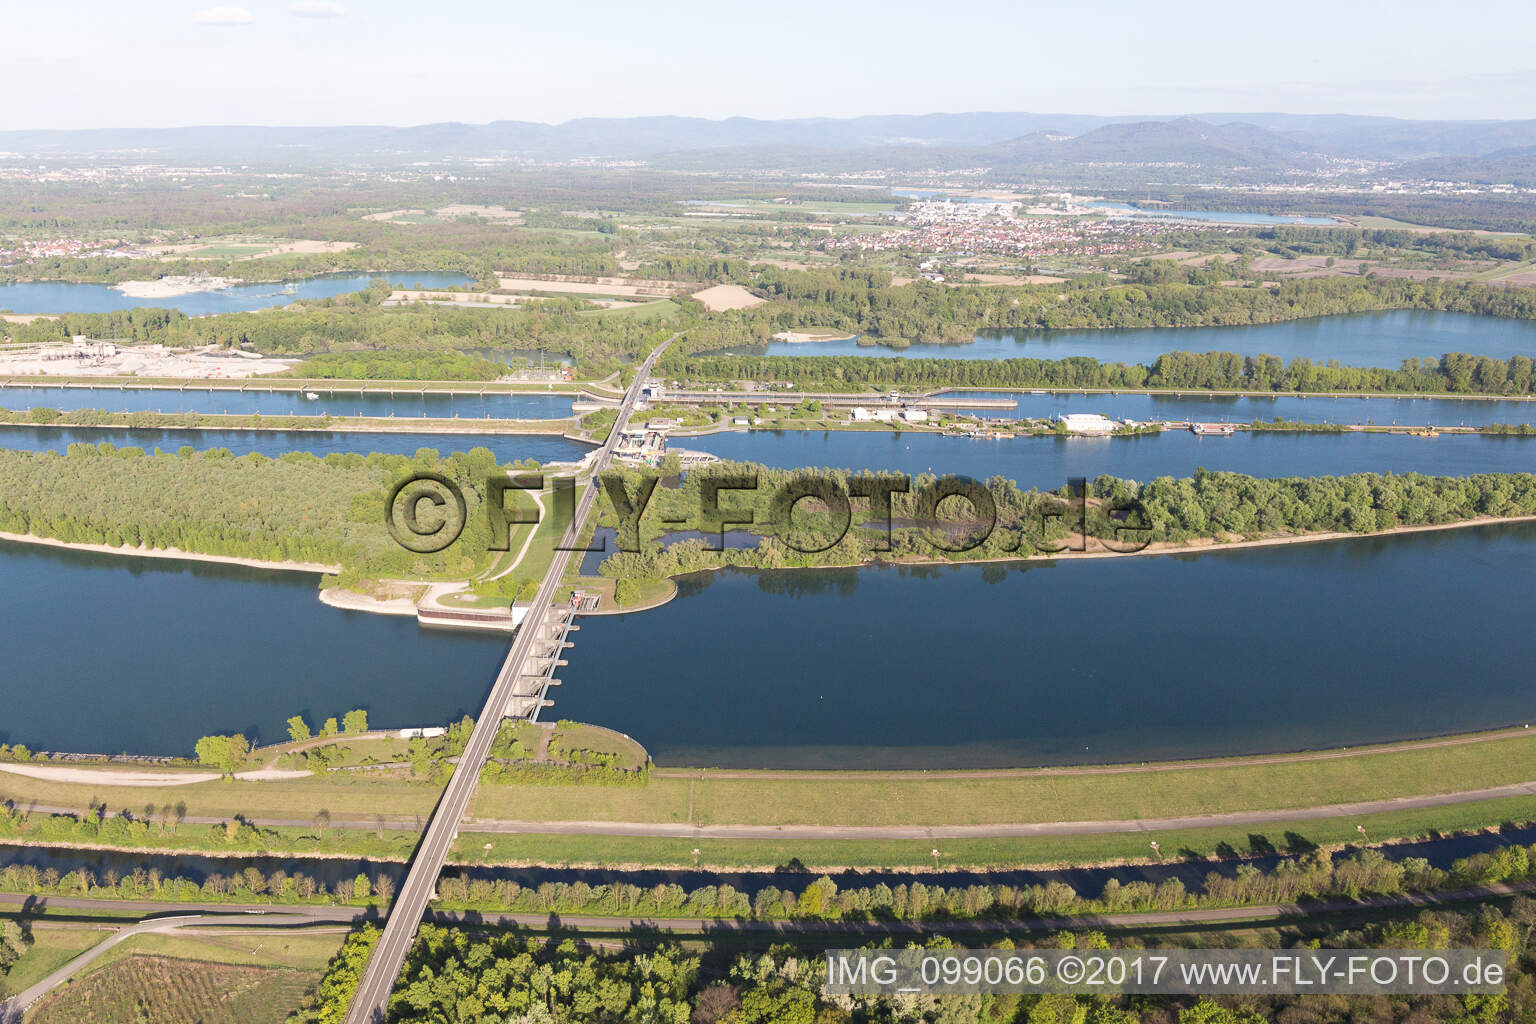 Rhine lock Iffezheim in Roppenheim in the state Bas-Rhin, France from the drone perspective